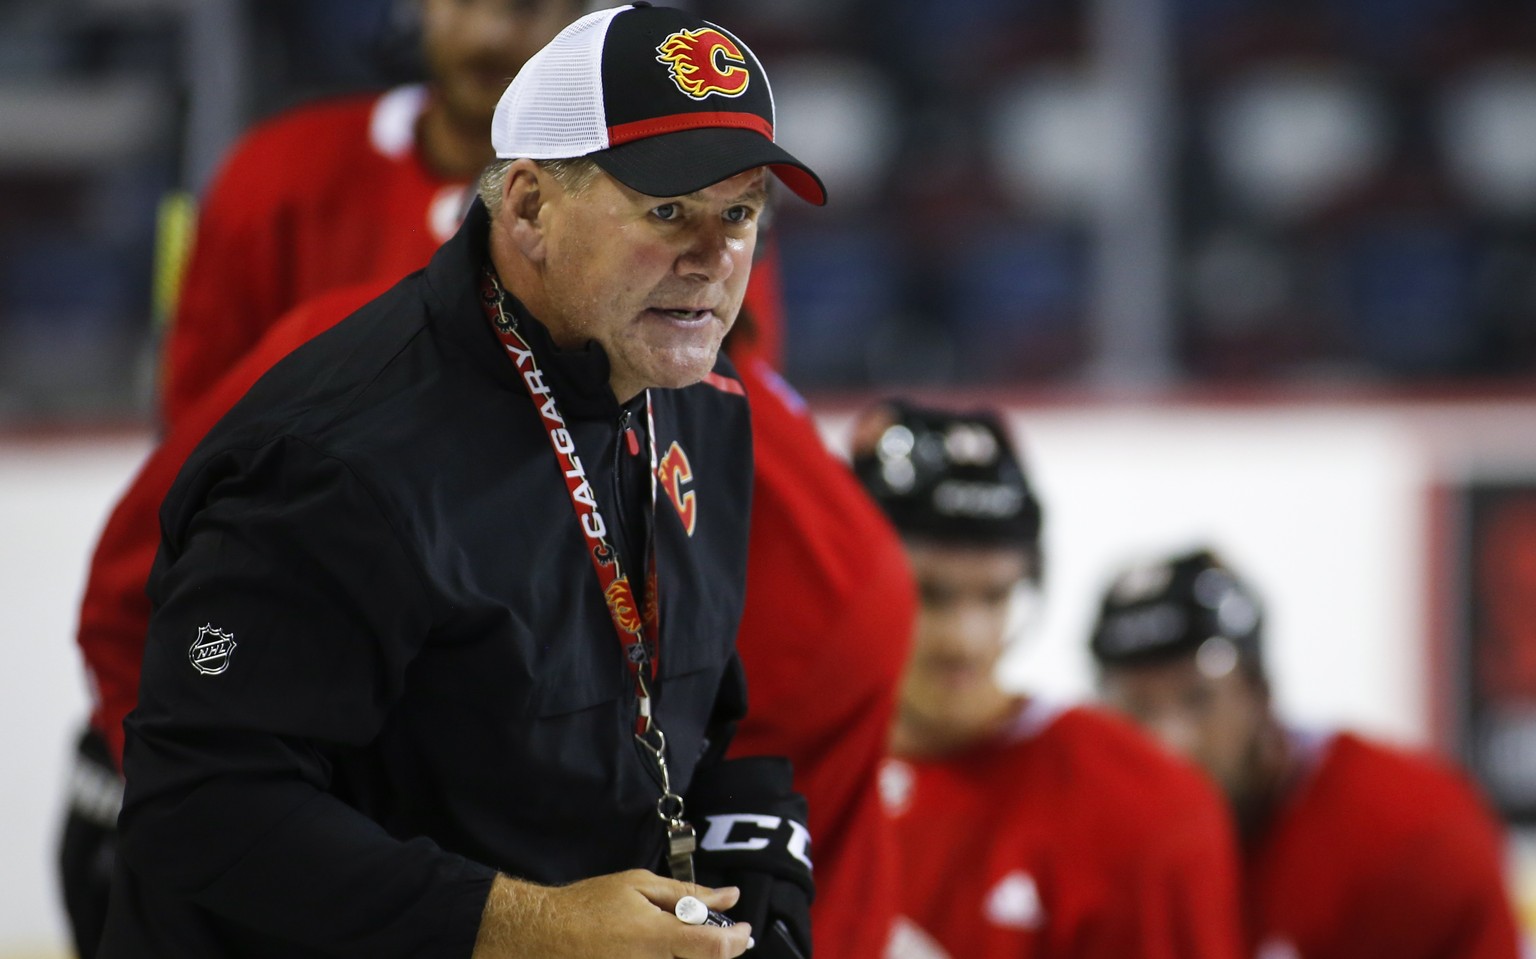 Calgary Flames head coach Bill Peters gives instruction during NHL hockey training camp in Calgary, Friday, Sept. 13, 2019. (Jeff McIntosh/The Canadian Press via AP)